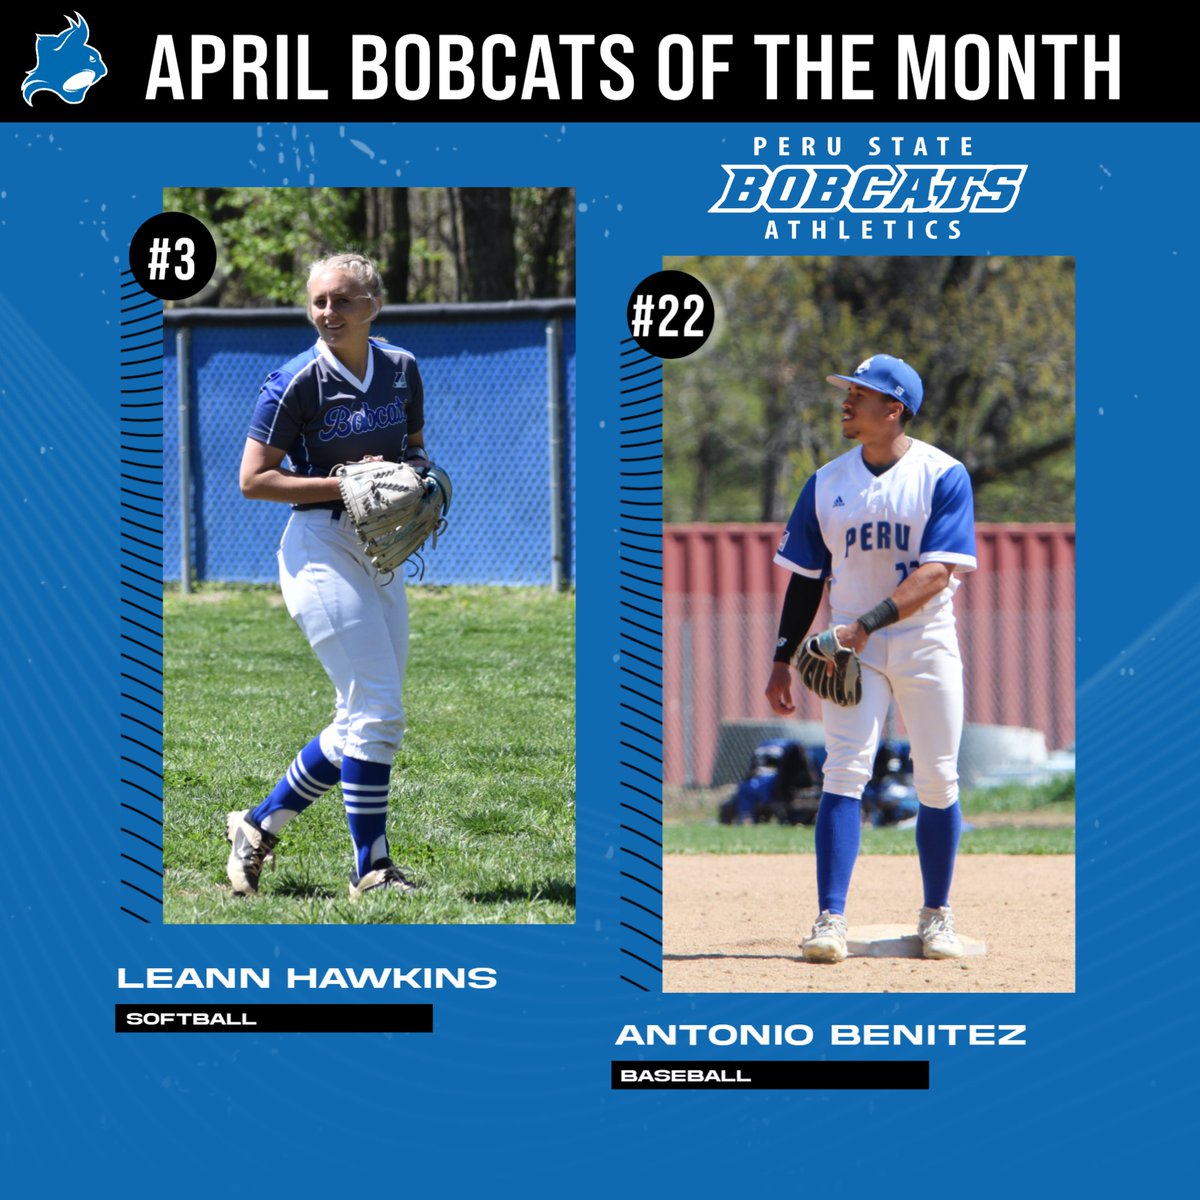 Congratulations to Leann Hawkins and Antonio Benitez on earning April Bobcats of the Month! #ClawsOut | #PeruState156